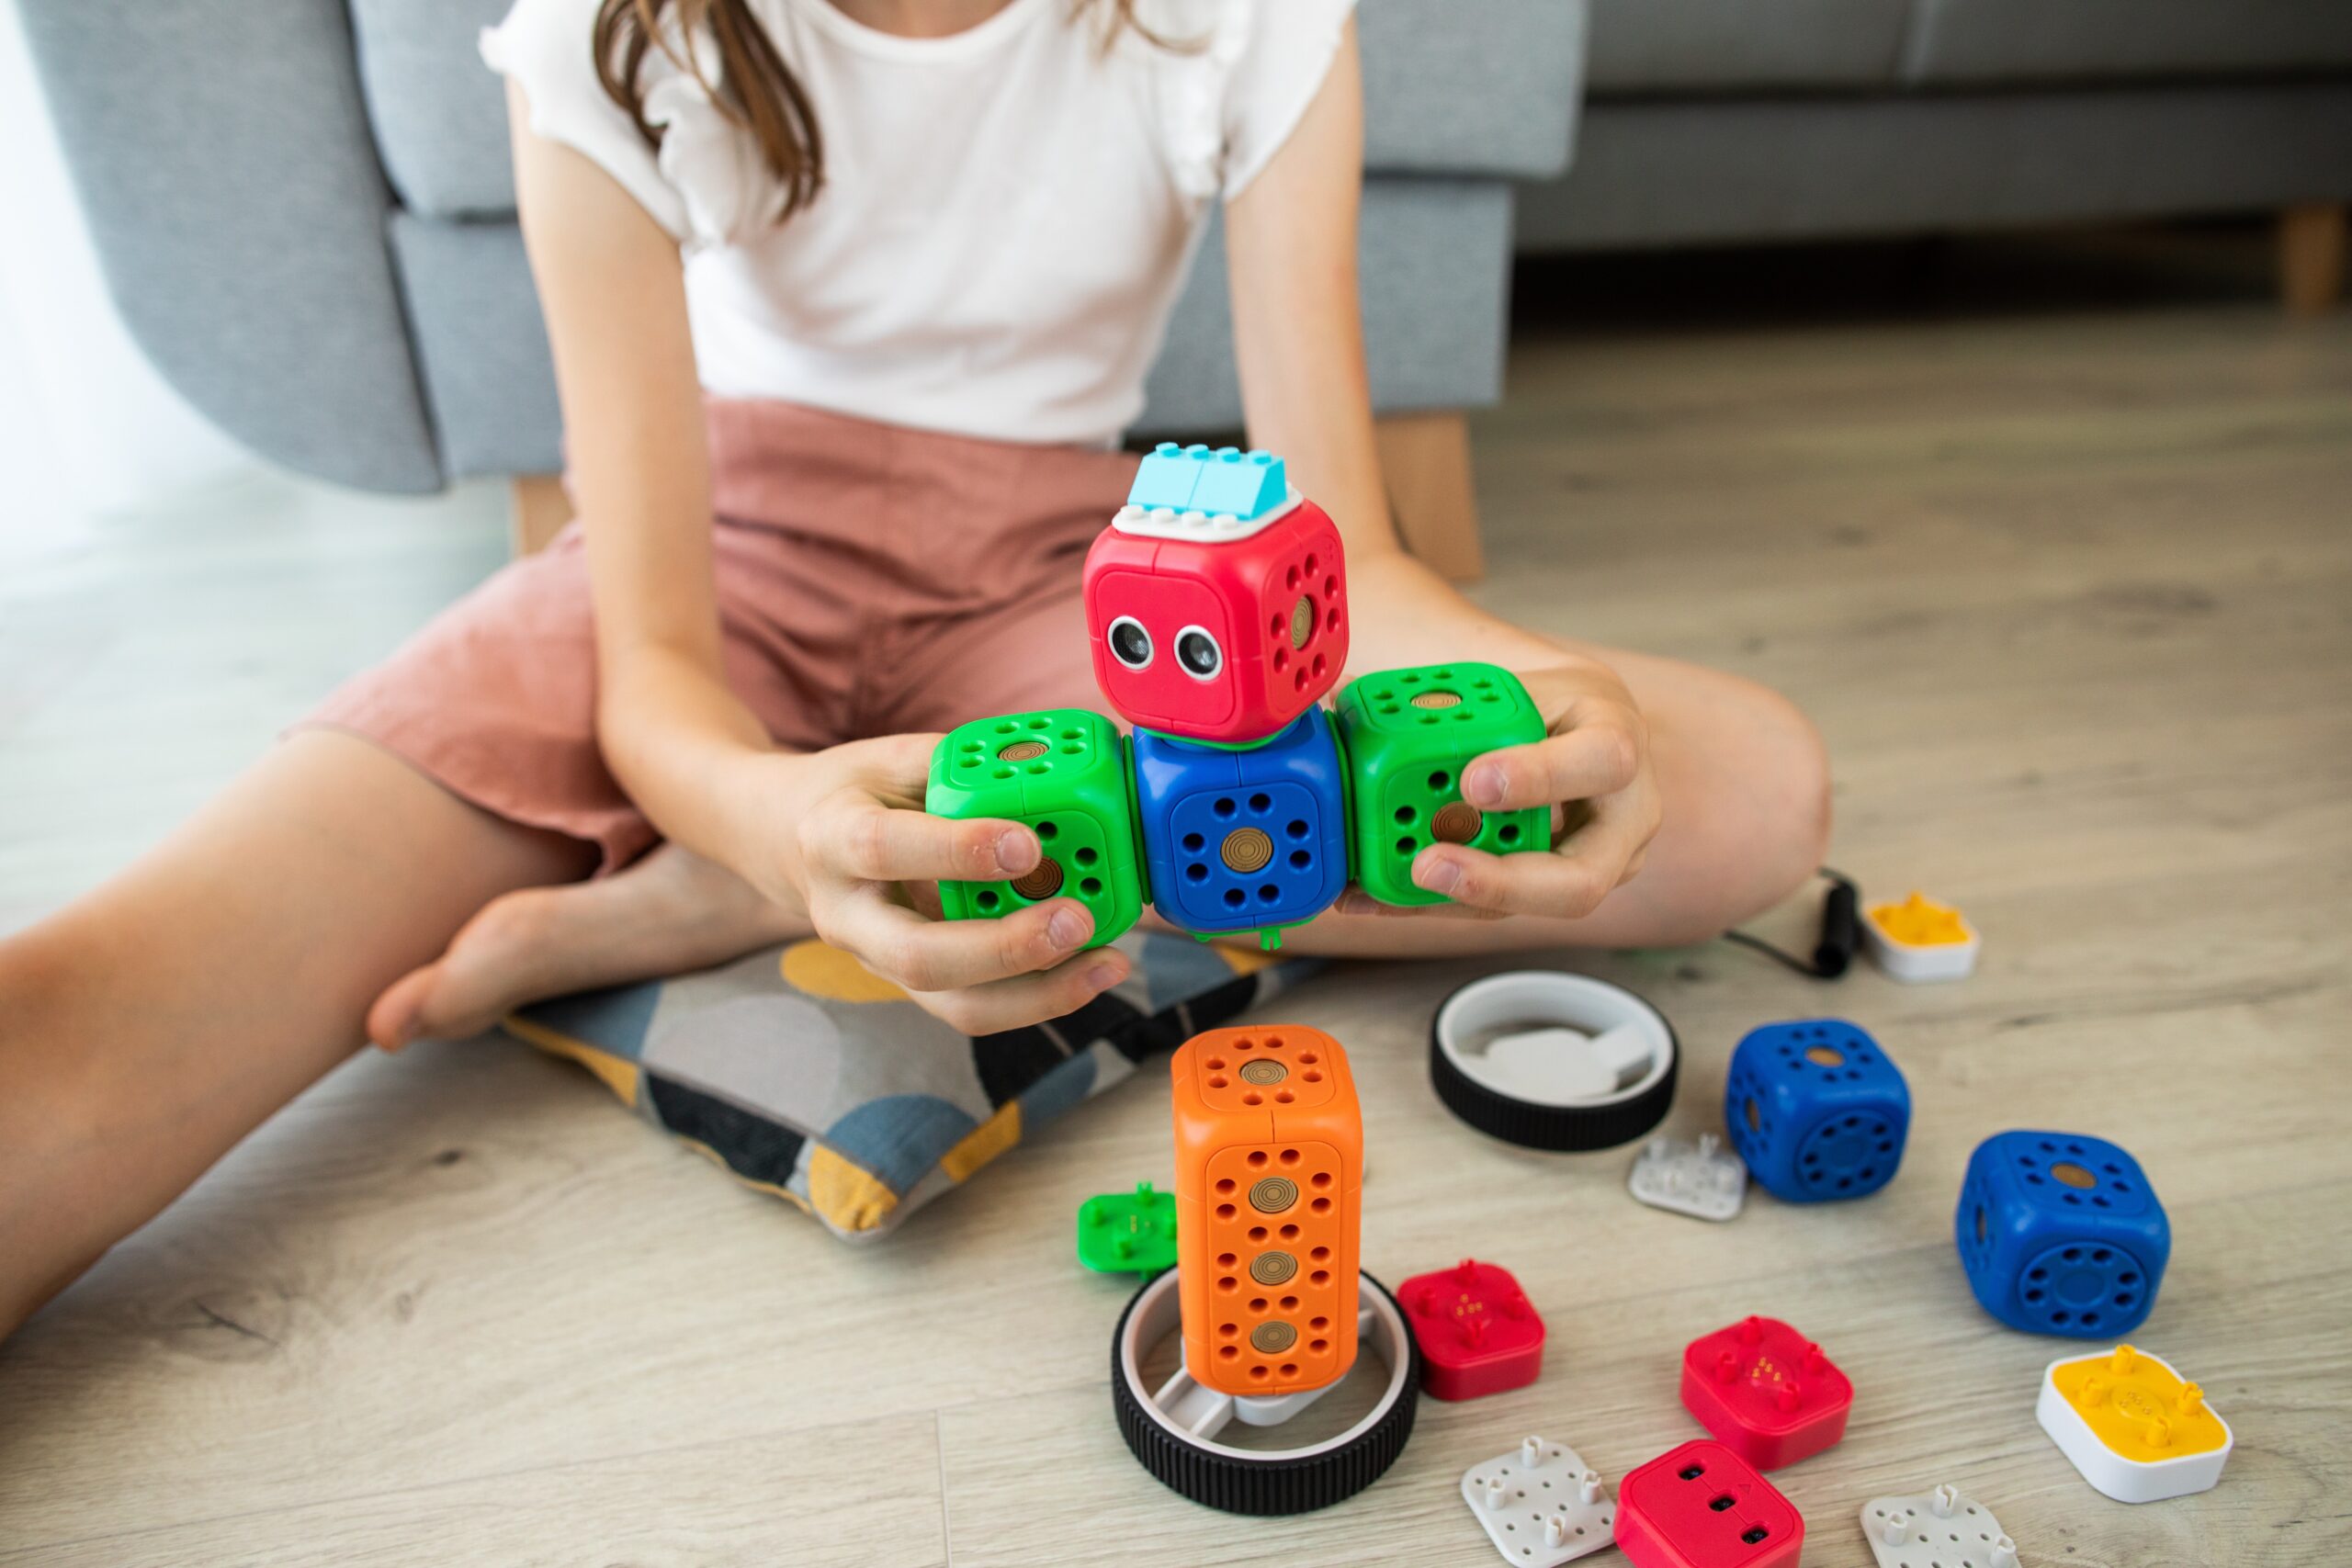 An image showcasing a diverse group of children engaged in play with a wide range of educational toys, displaying expressions of curiosity, focus, and joy, highlighting the transformative impact of these toys on child development